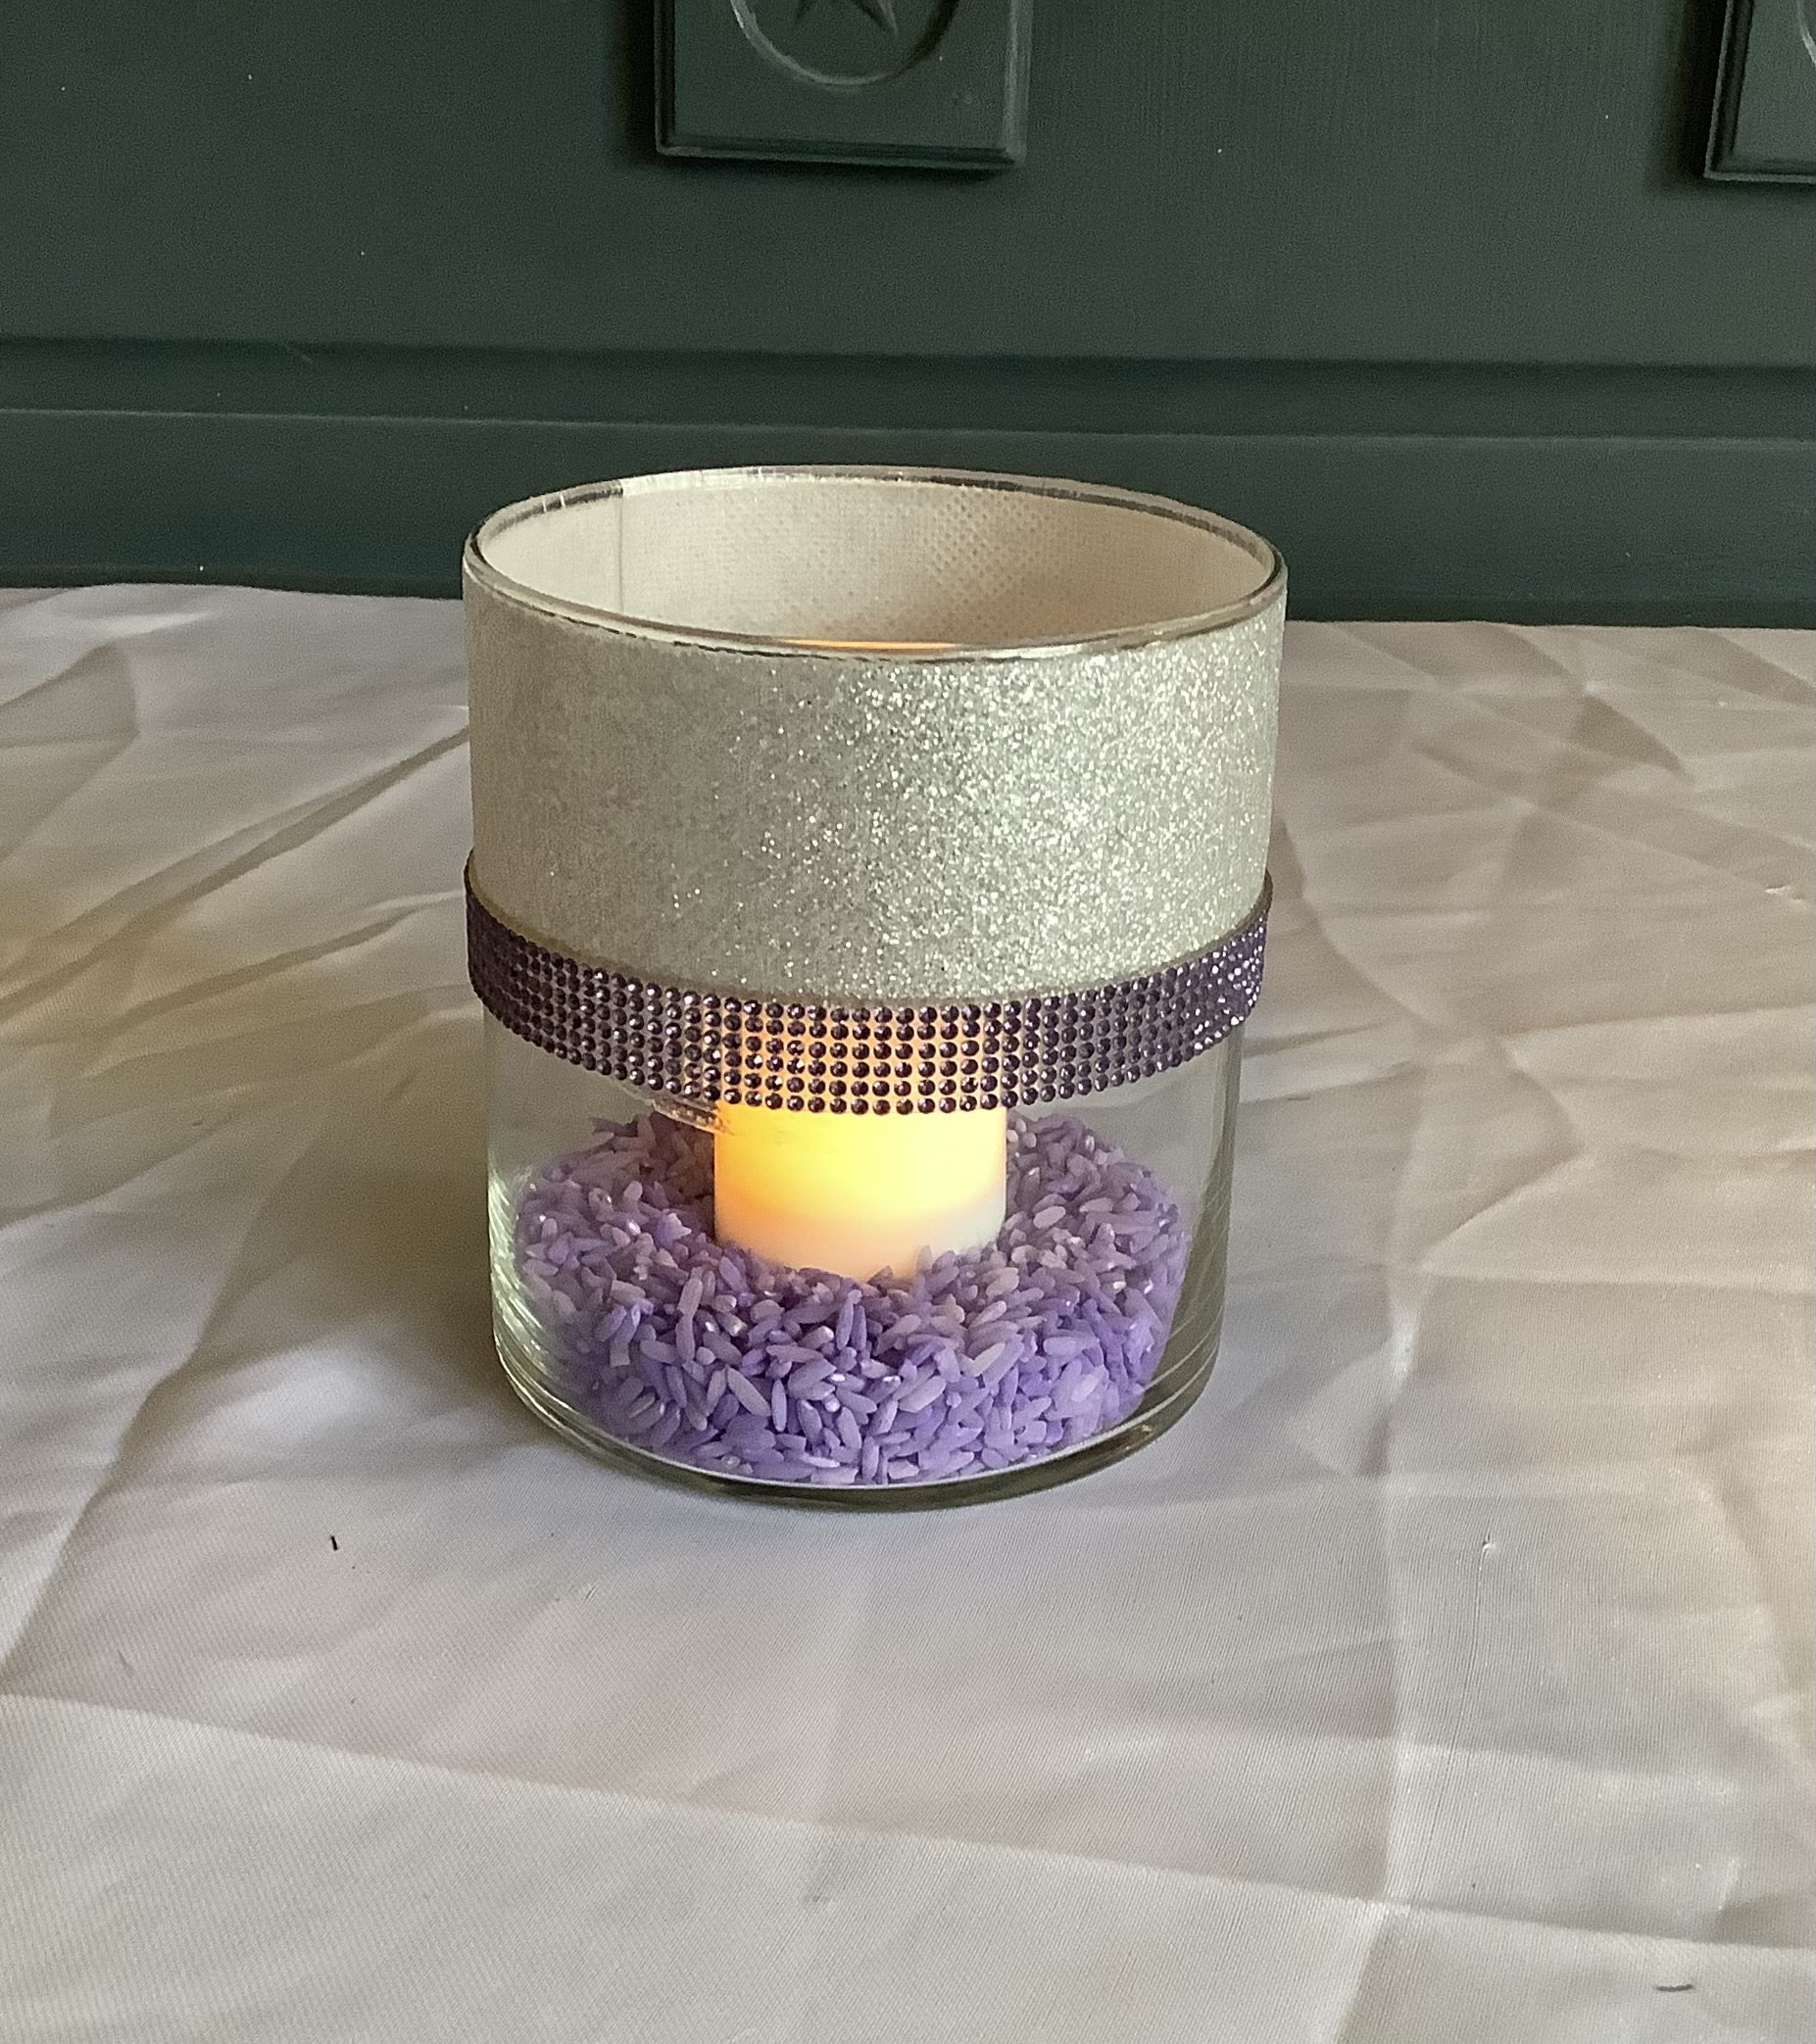 DIY Glitter Candle Holders